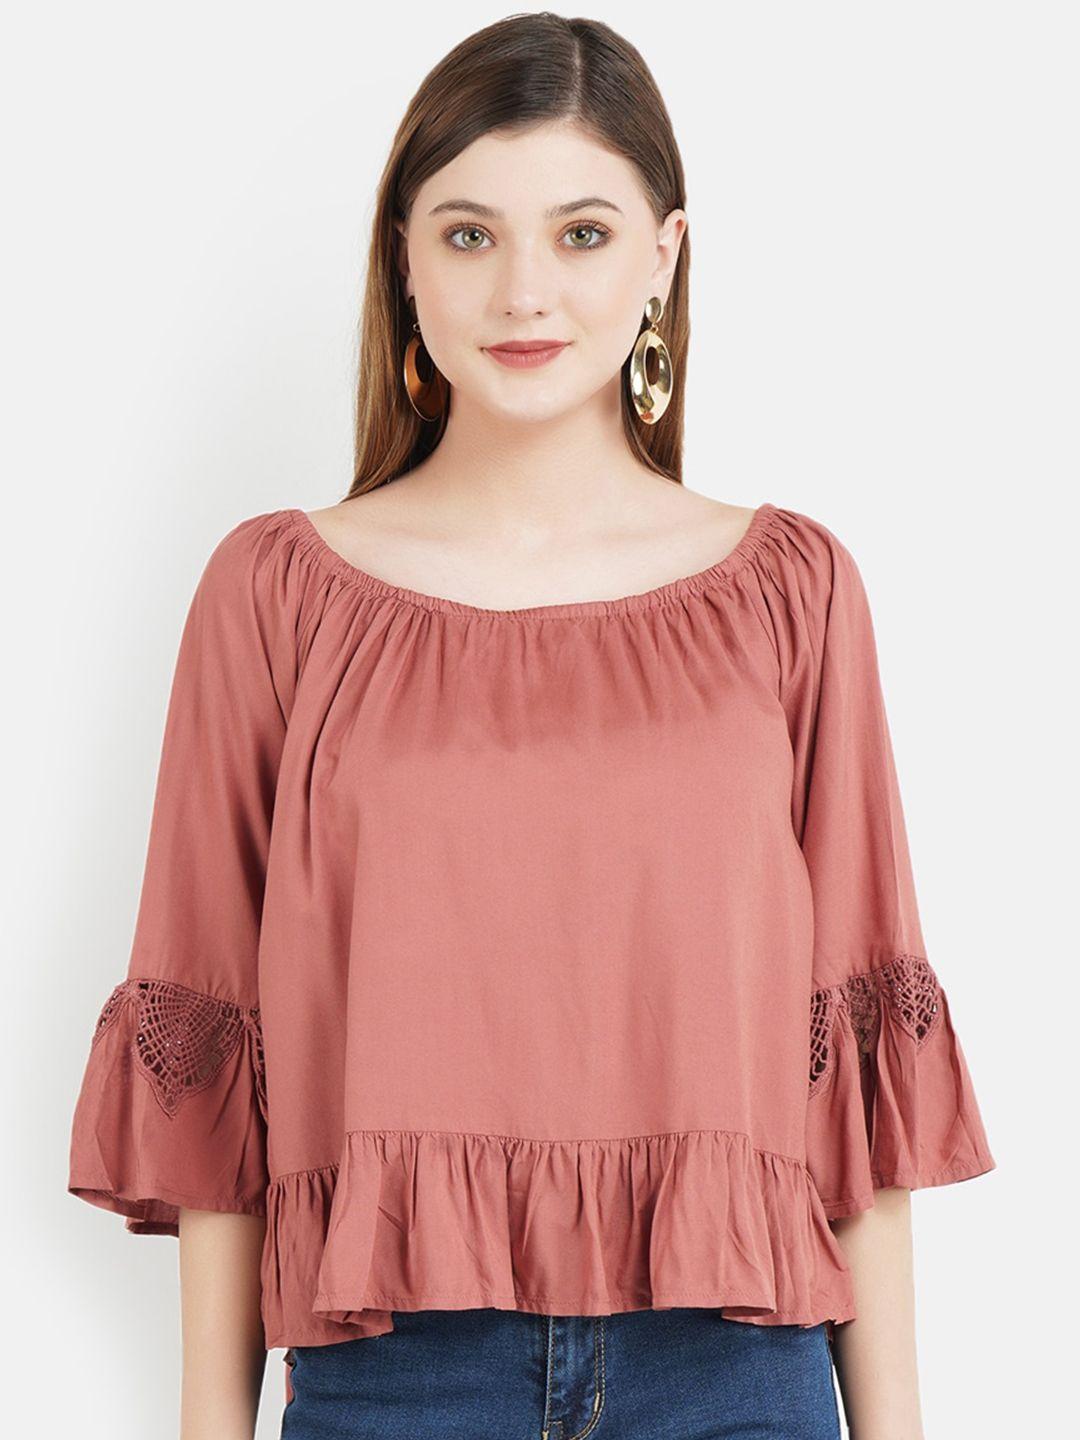 aditi wasan coral pink bell sleeves a-line top